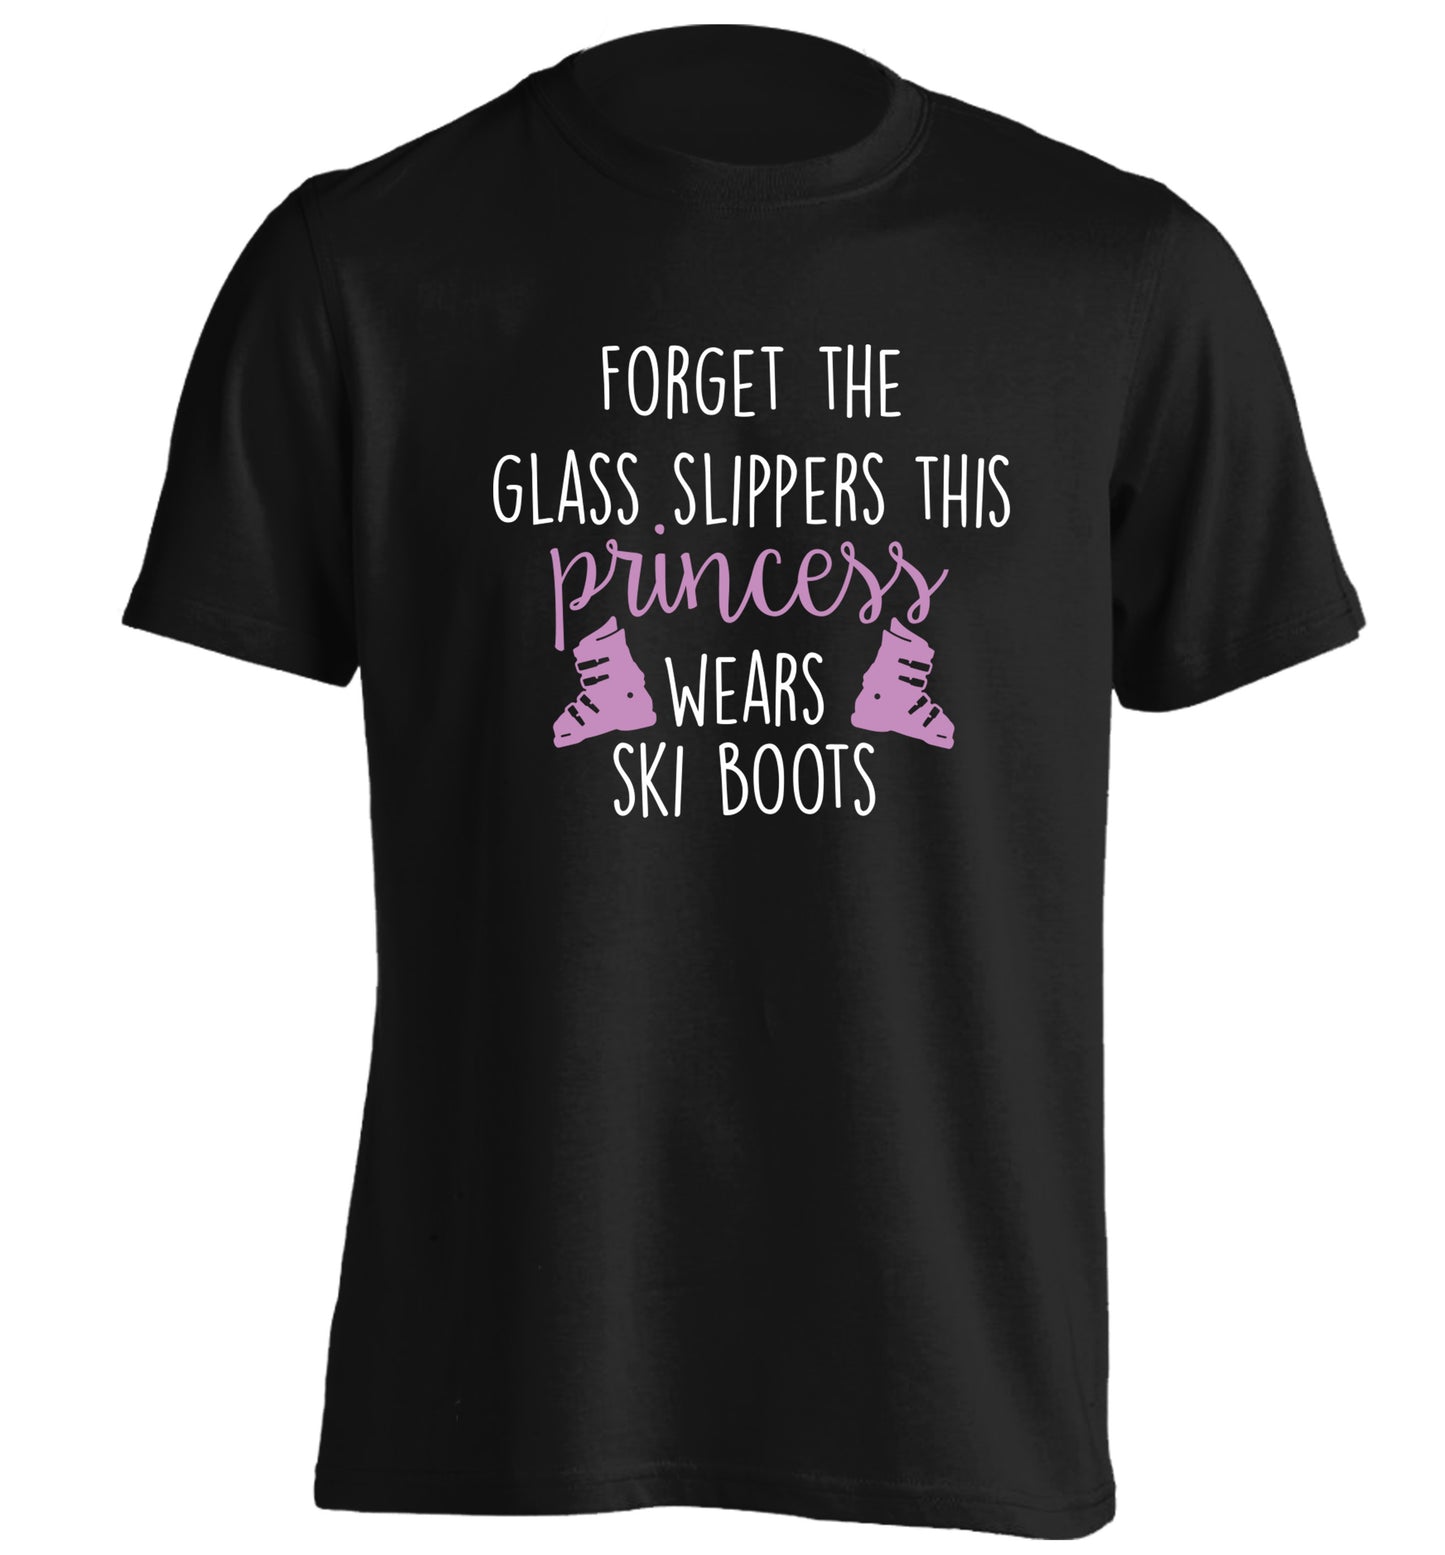 Forget the glass slippers this princess wears ski boots adults unisex black Tshirt 2XL